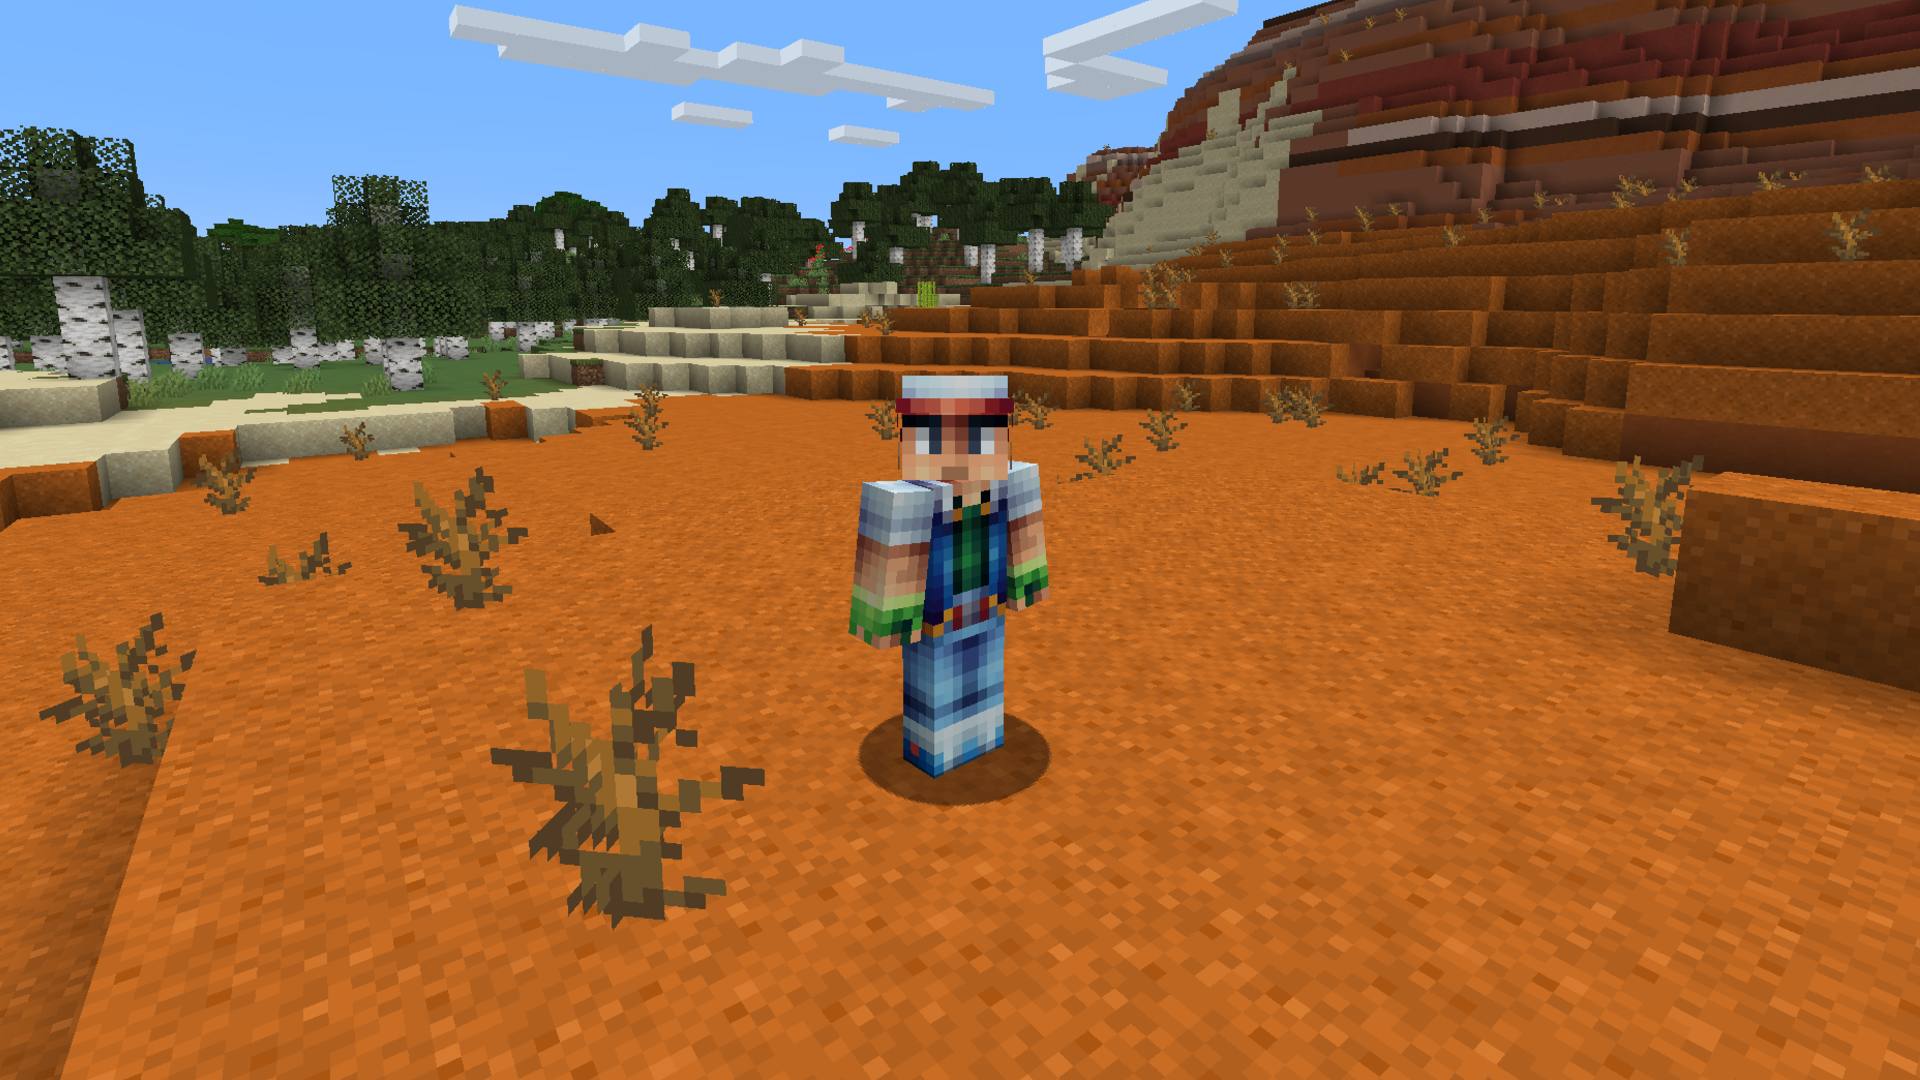 Minecraft skins: a player wearing a skin made of a giant eyeball, heart, and bones, standing in front of a tree.